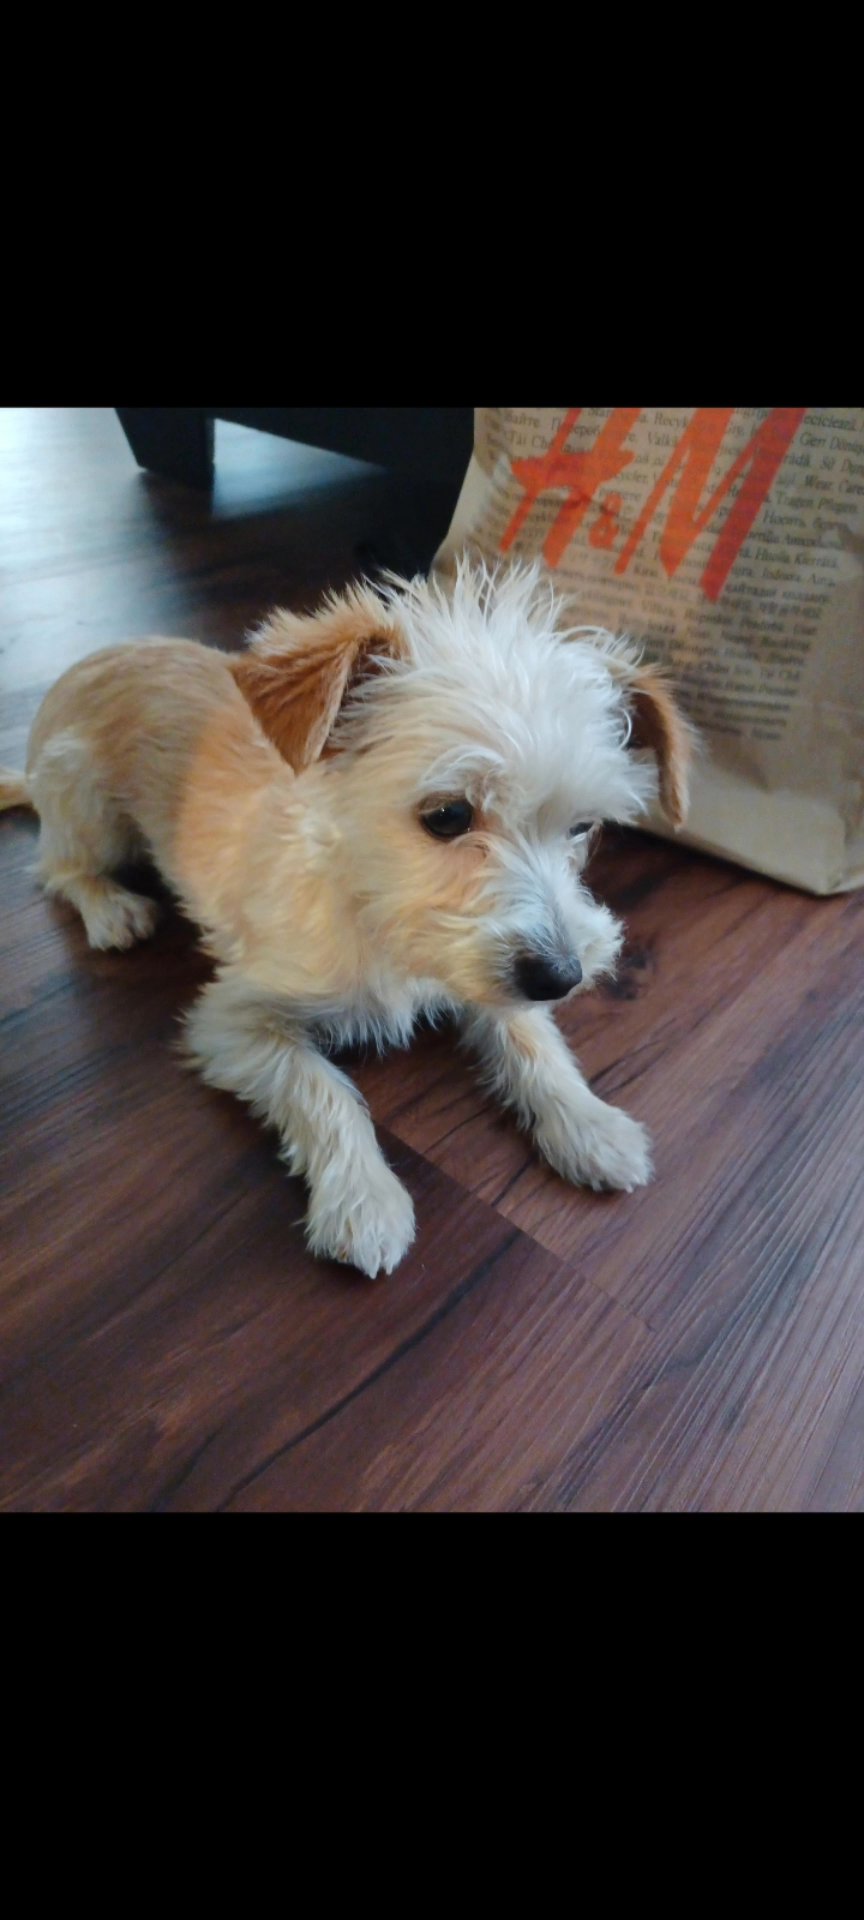 Cute baby Morkie needs a new better home in Los Angeles, California